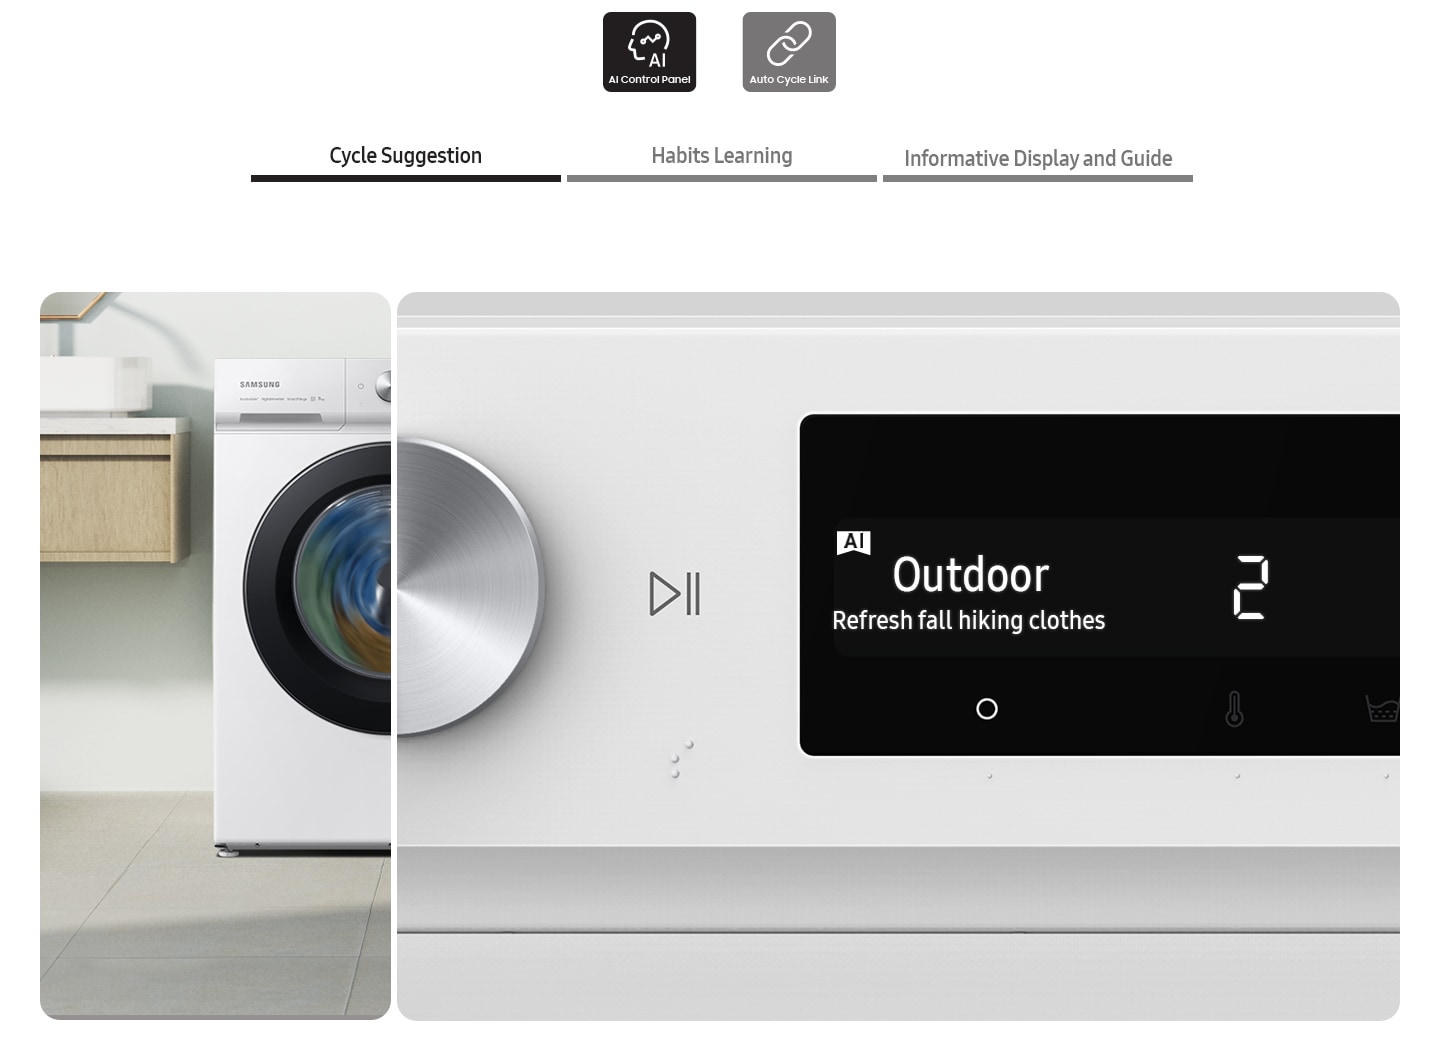 The AI washer’s control panel displays the Cycle suggestion, Habits learning, Informative display and guide.